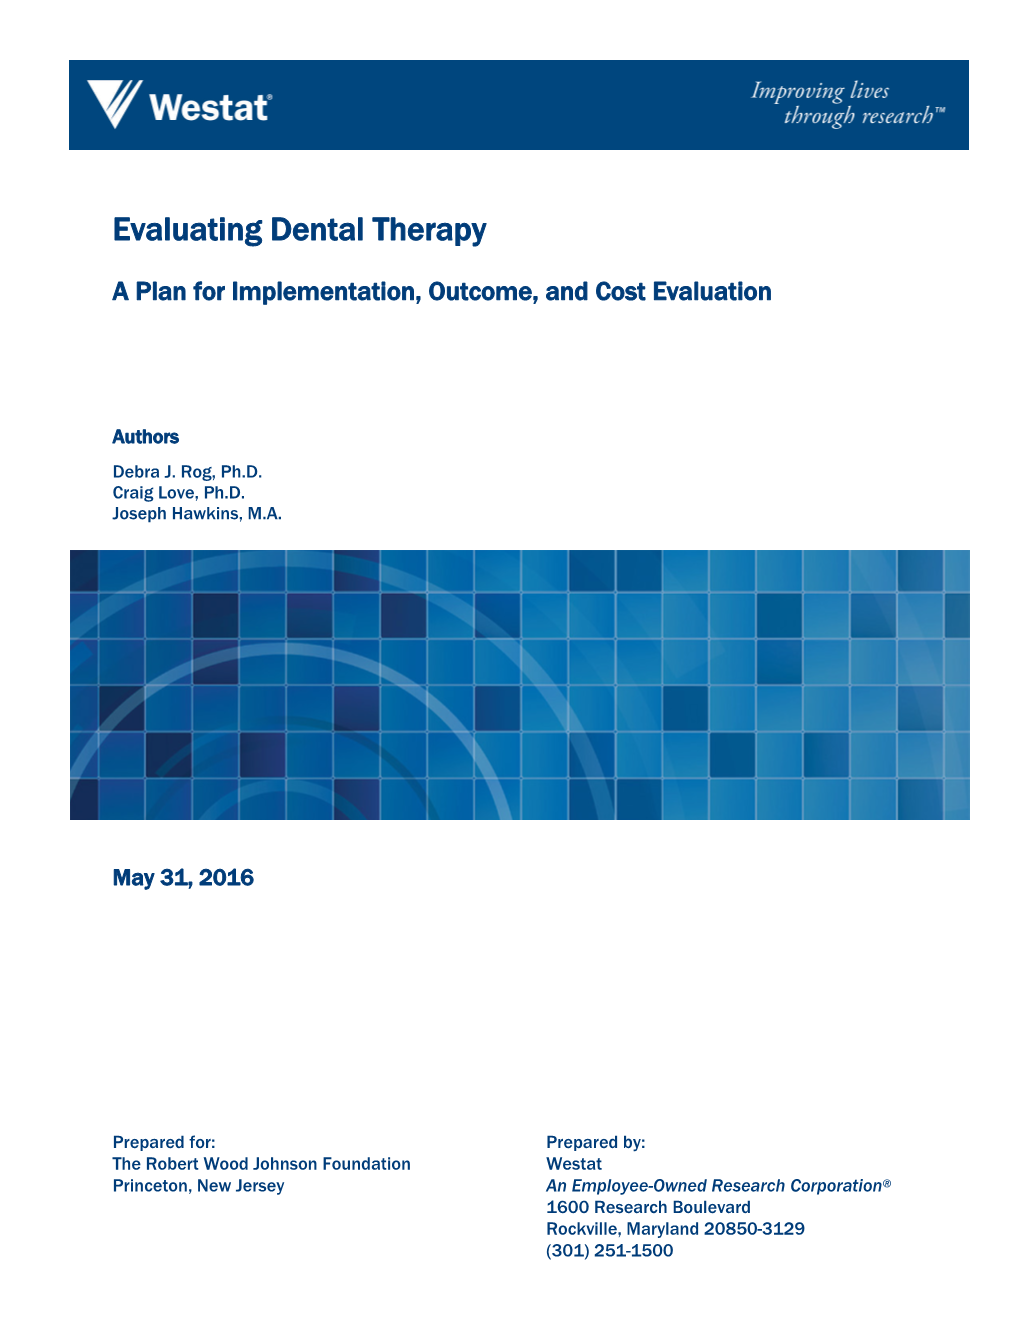 Plan for Evaluating Dental Therapy Programs That Can Be Tailored to the Individual Program, Practice, and Community Context Being Evaluated